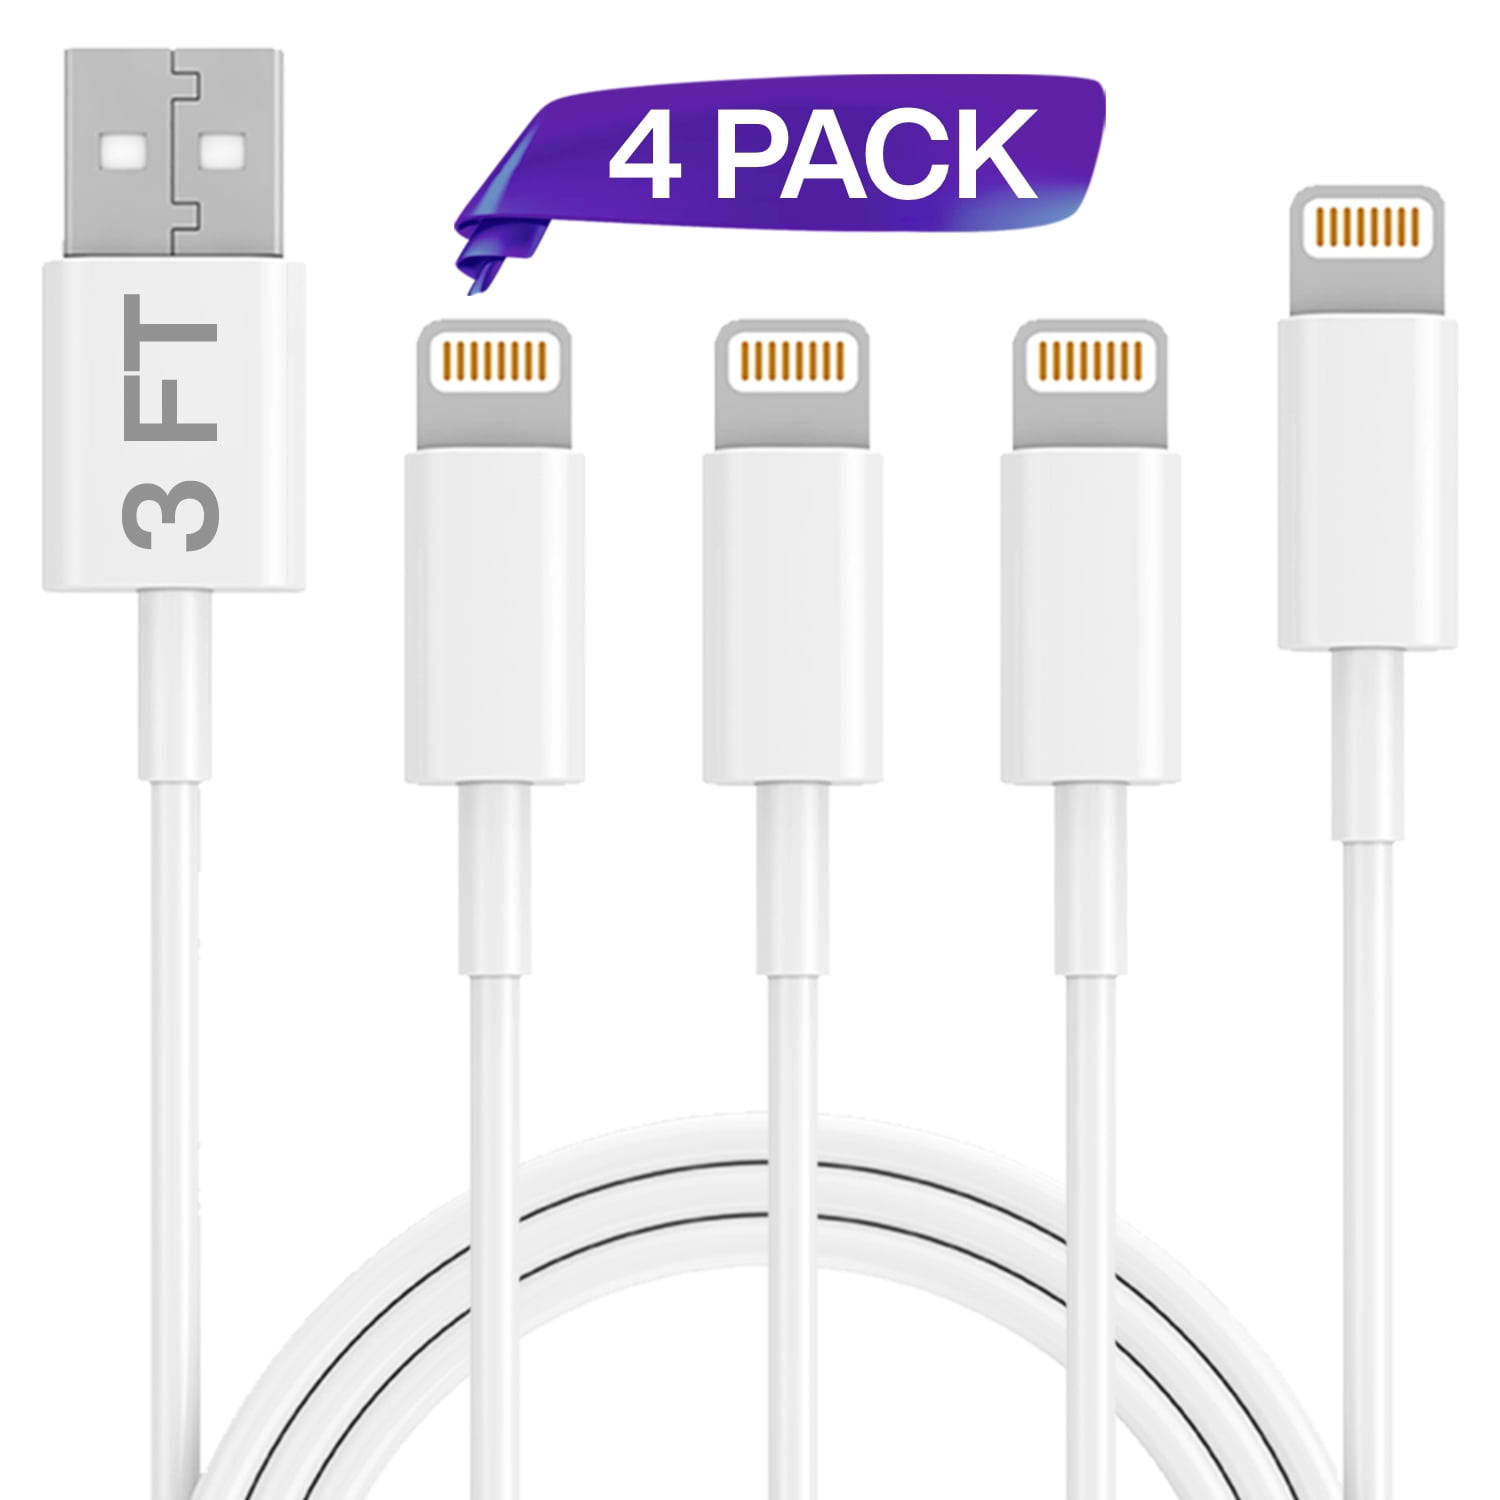 2 Pack 3FT USB Cable iPhone Cable Set Truwire Compatible with iPhone 11,Pro,Pro Max,Xs,Xs Max,XR,X,8,8 Plus,7,7 Plus,6S,6S Plus,iPad Air,Mini/iPod Touch/Case Original Size 